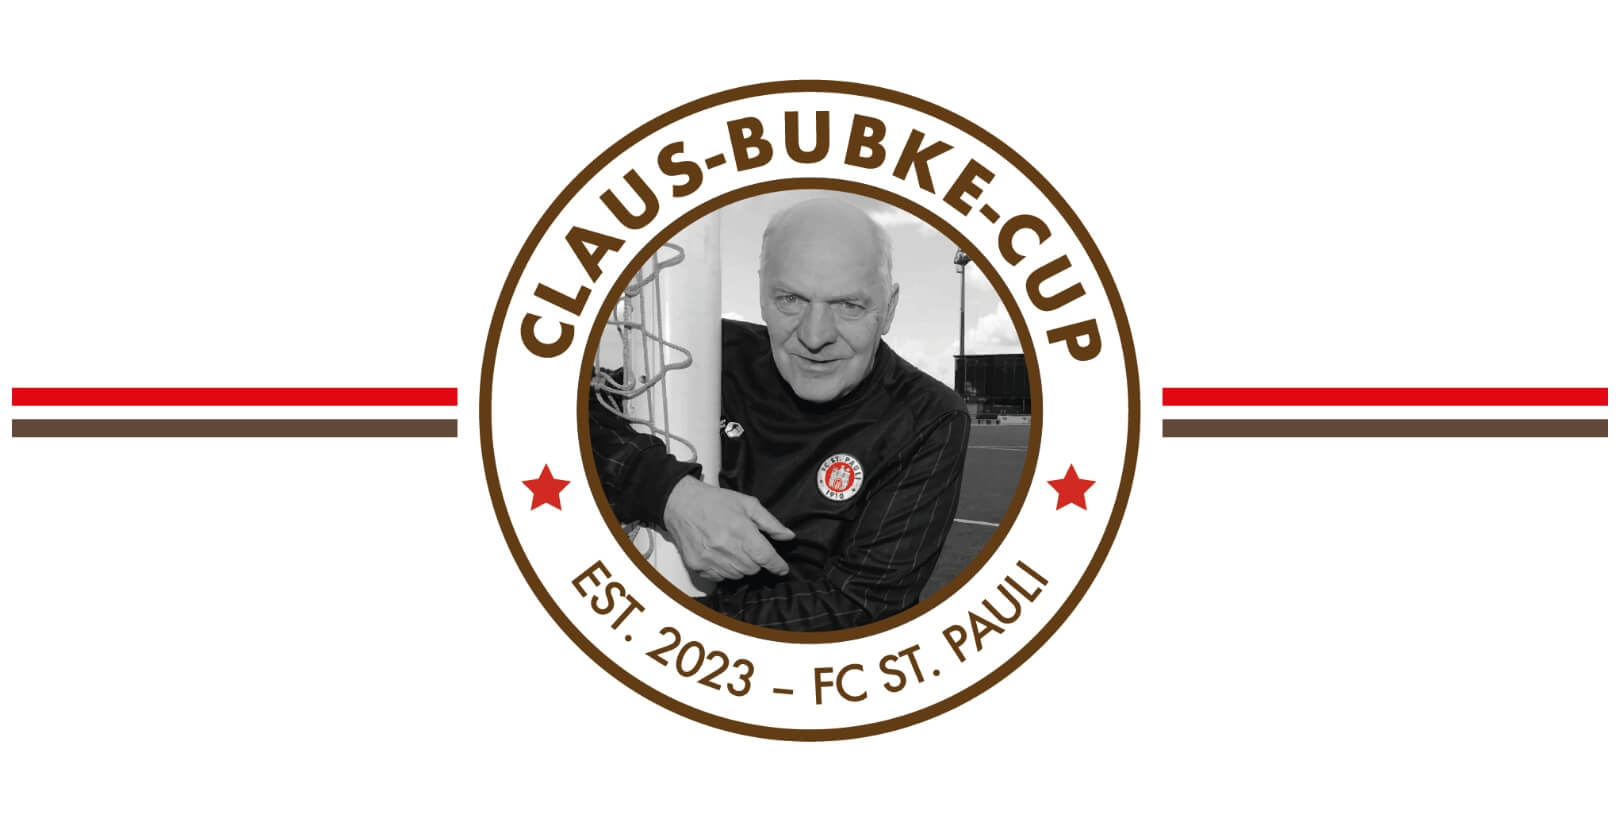 Claus-Bubke-Cup